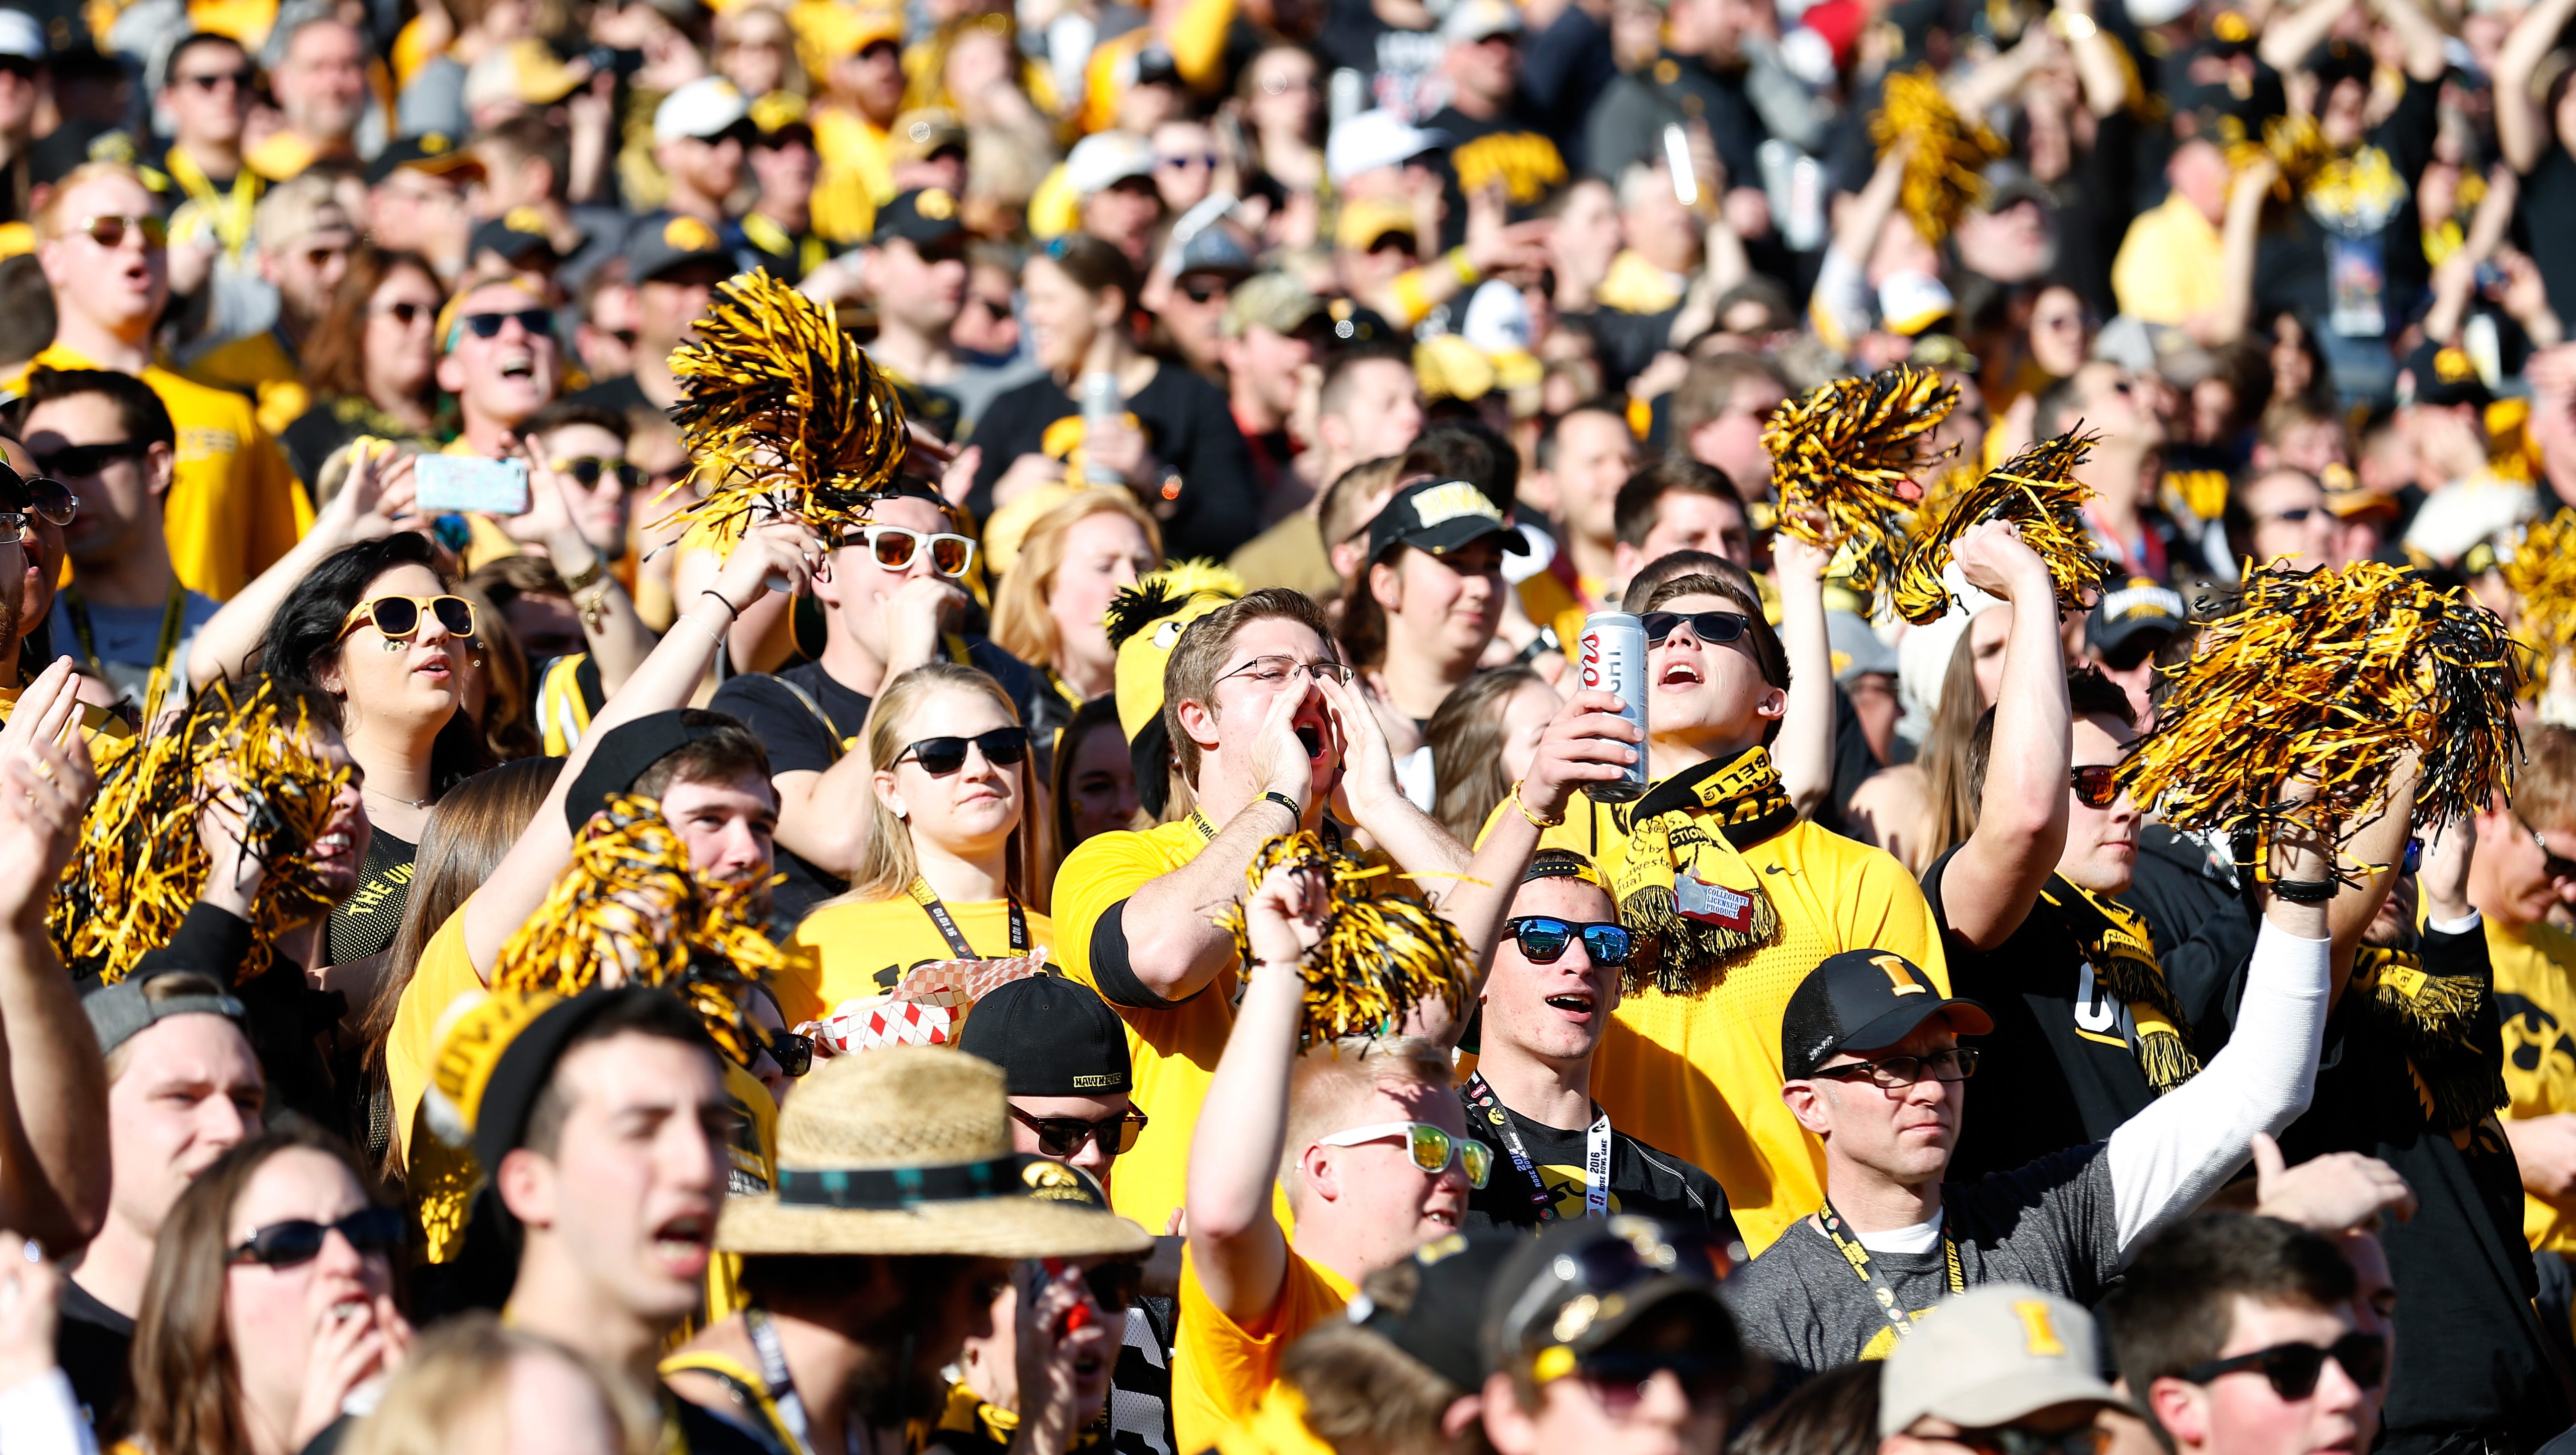 Iowa Hawkeyes fans cheer before the 102nd Rose Bowl Game against the Stanford Cardinal on January 1, 2016 at the Rose Bowl in Pasadena, California.